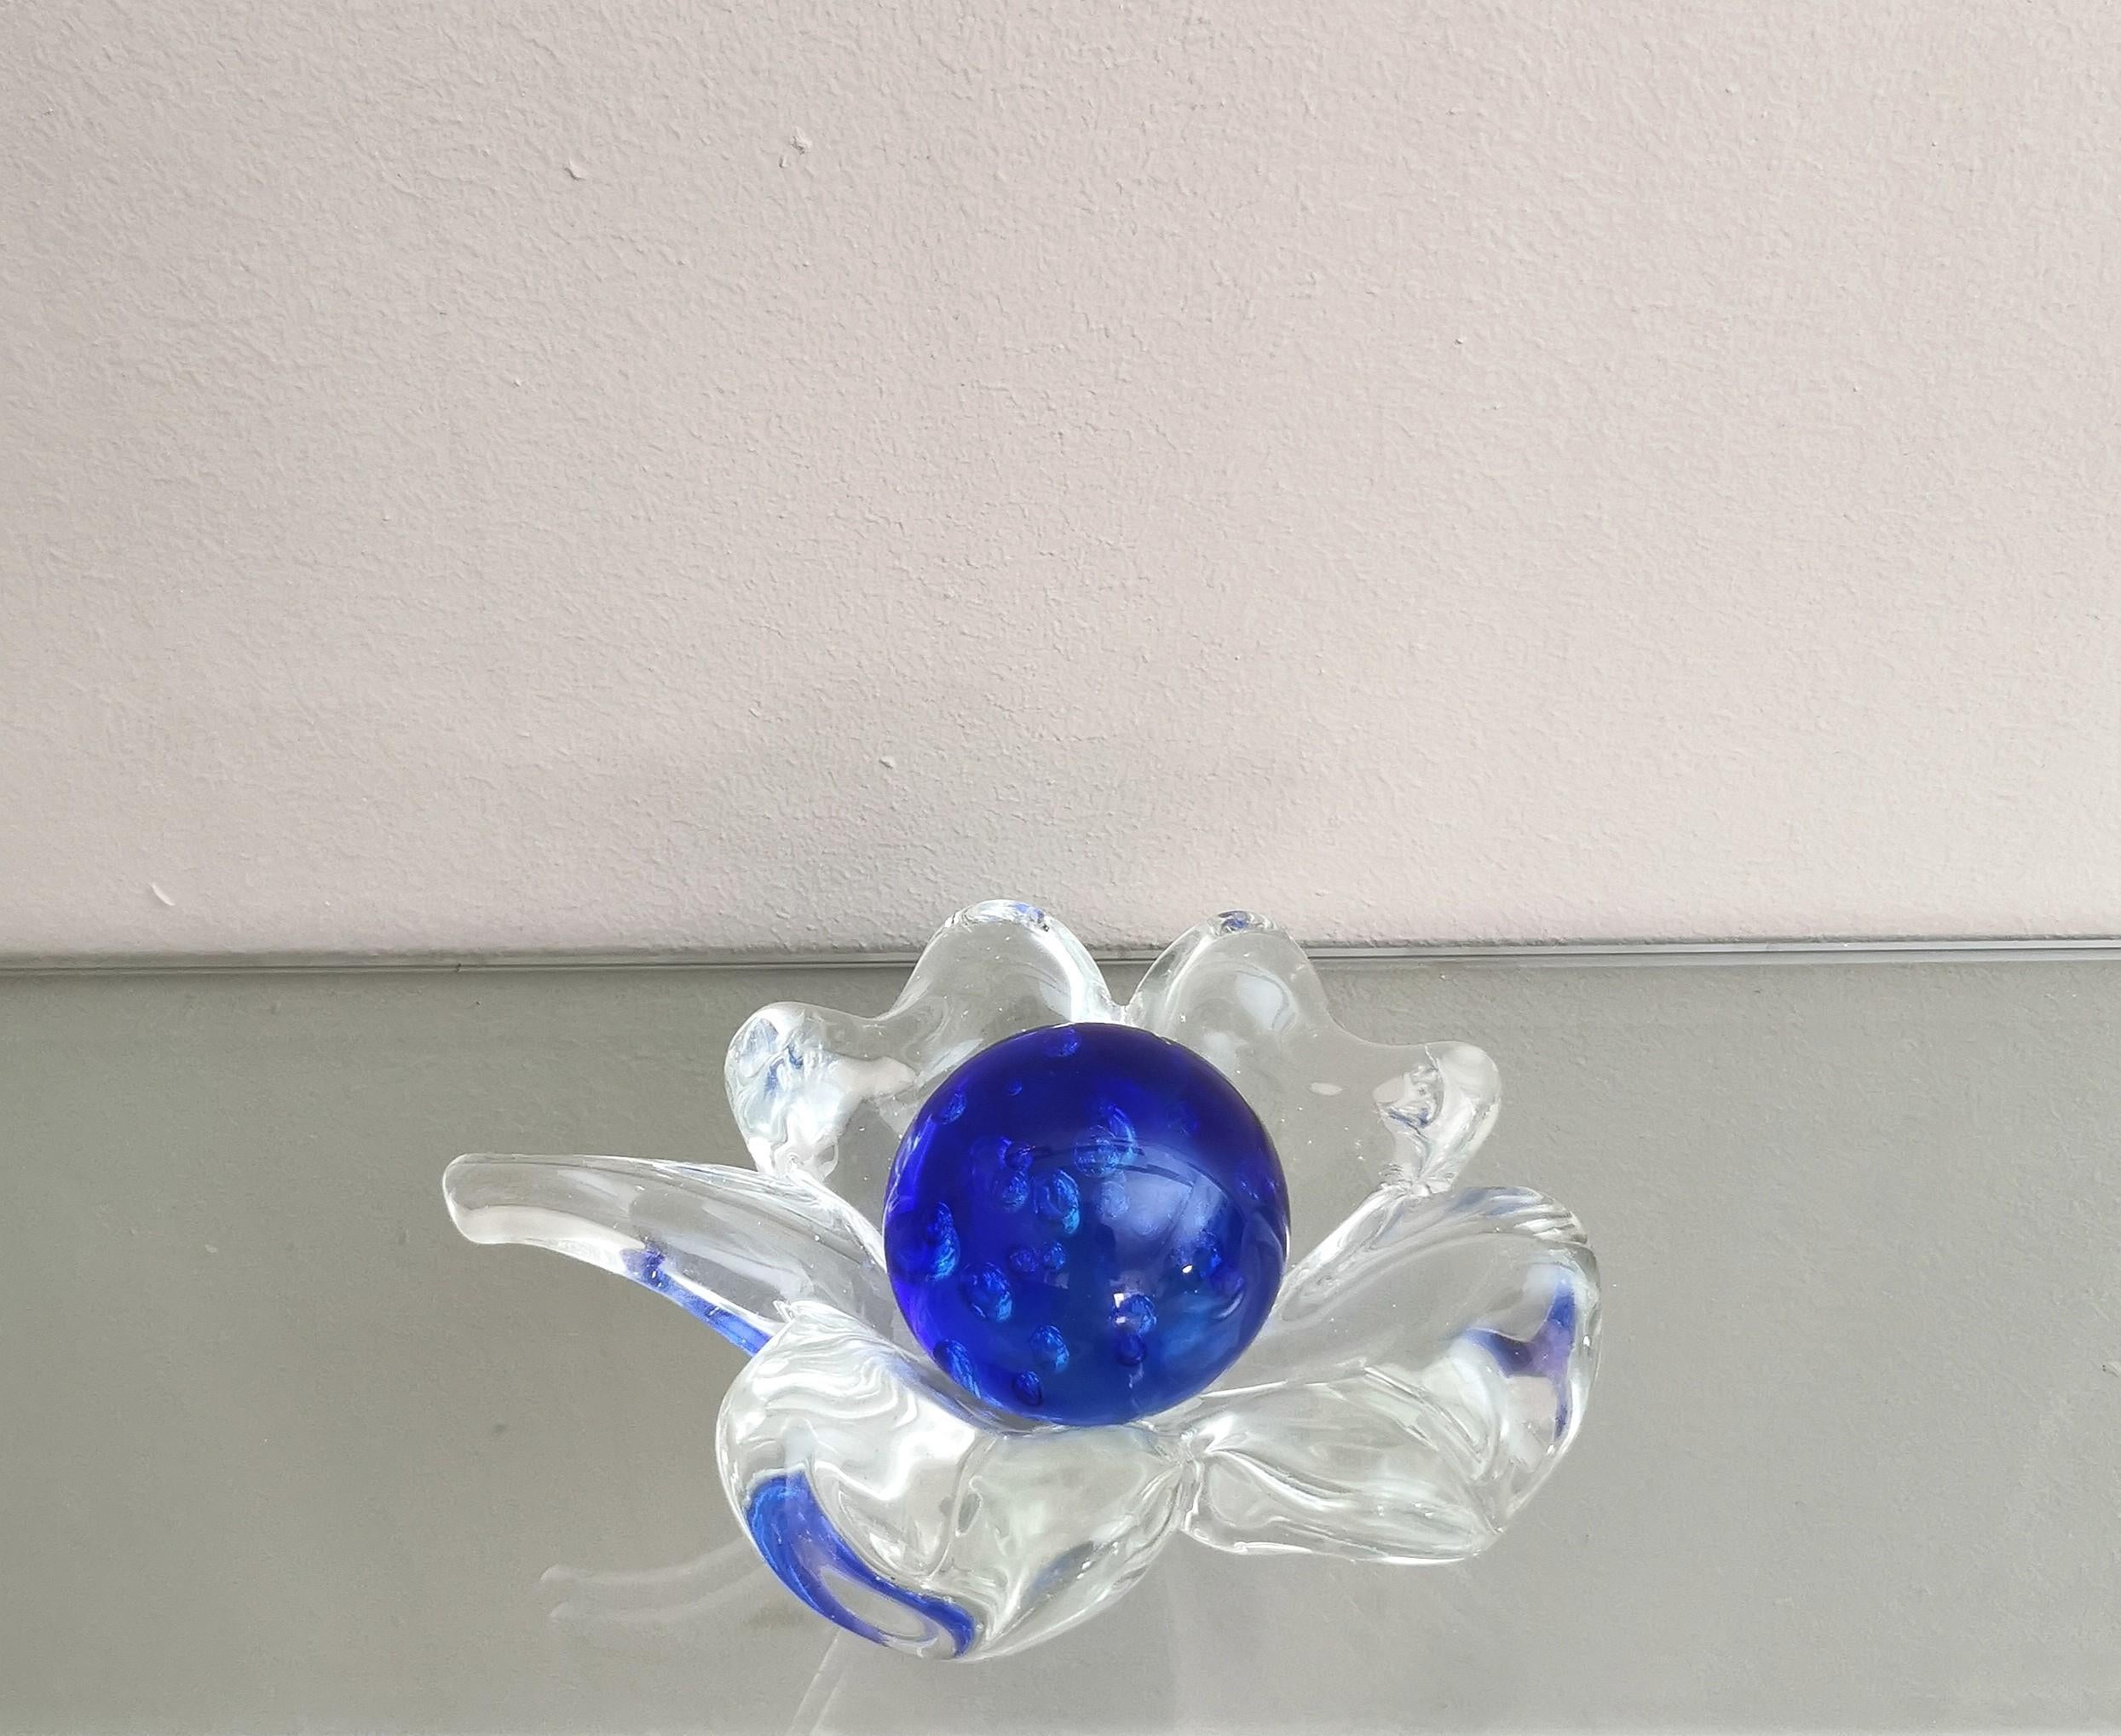 Decorative object produced in Italy in the 70s attributed to the italian designer Flavio Poli.
This object was made of transparent Murano glass in the shape of a flower, with a blue Murano glass 